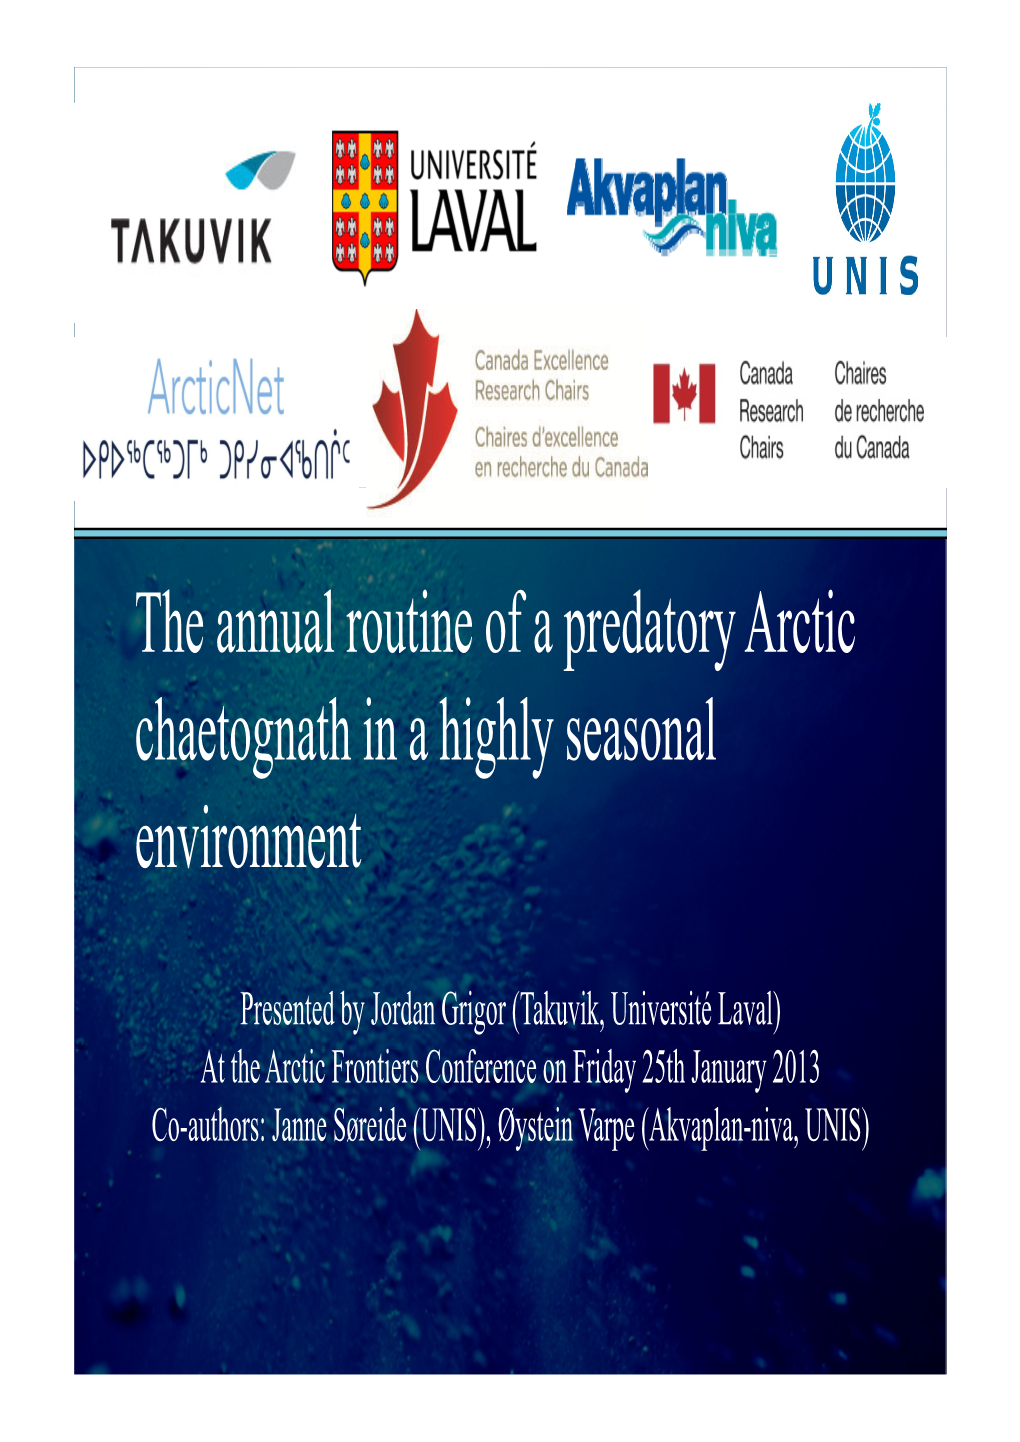 The Annual Routine of a Predatory Arctic Chaetognath in a Highly Seasonal Environment